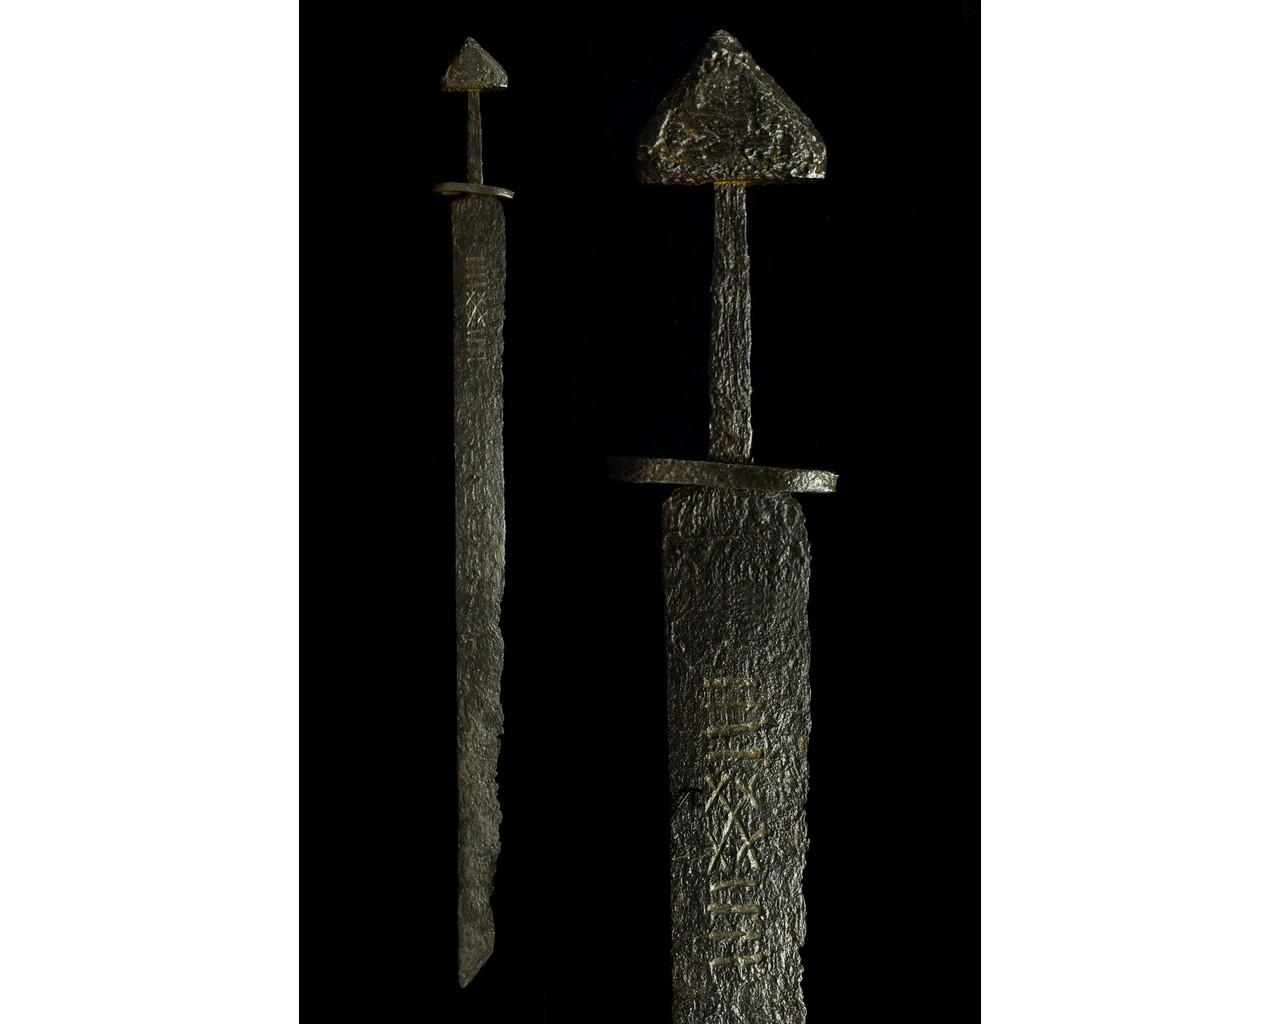 VIKING SINGLE-EDGED SWORD WITH INLAID AND HANDLE